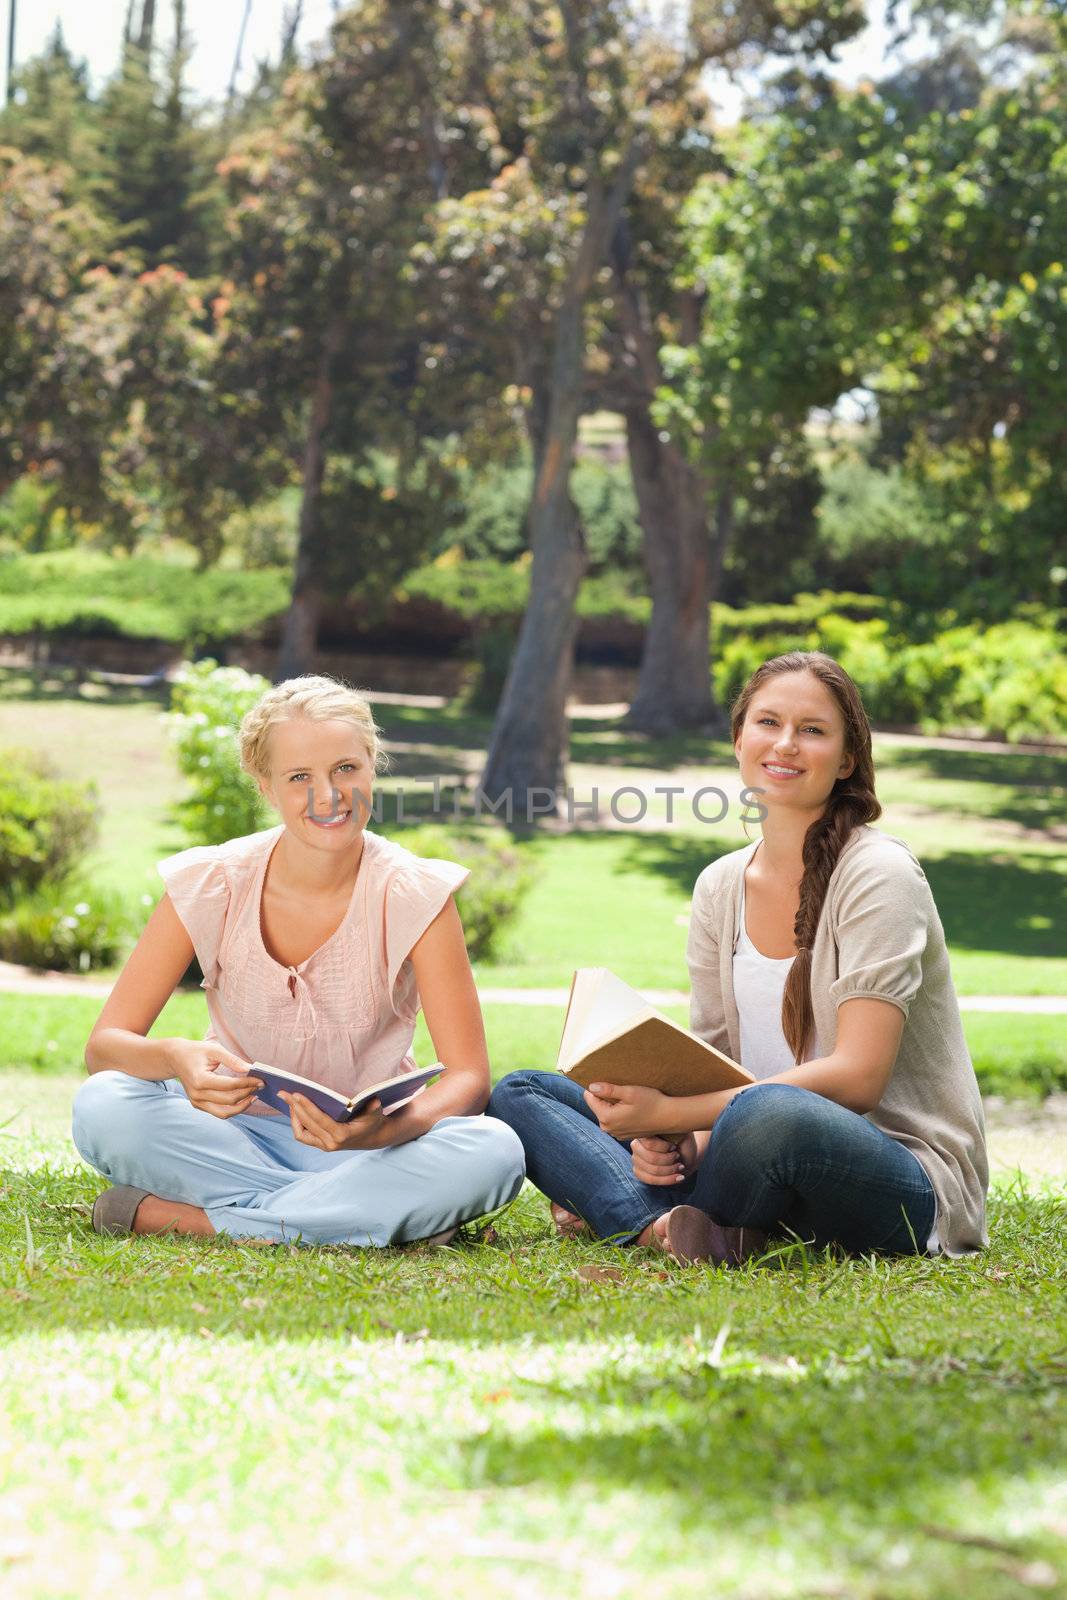 Smiling young women with their books sitting in the park